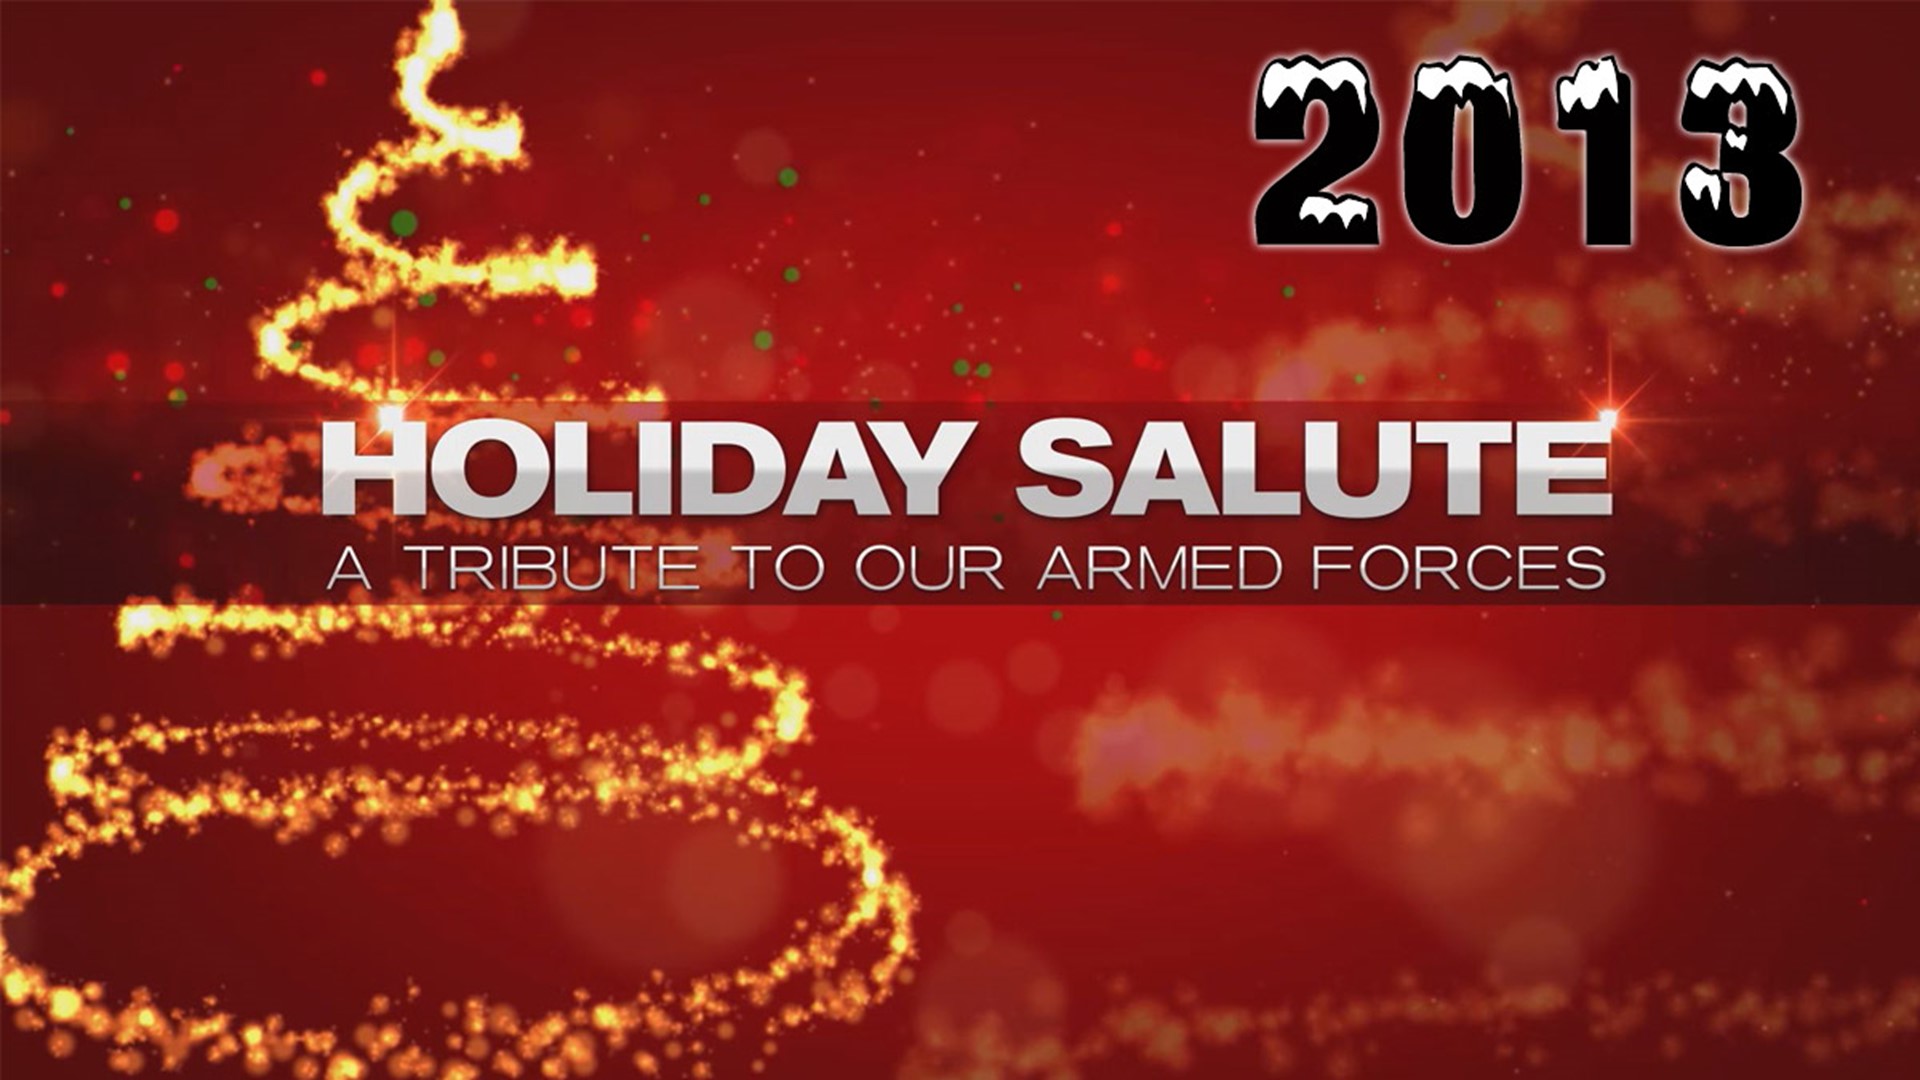 For more than 35 years, 13News Now has honored our military men & women with an annual holiday special. This is the 28th annual Holiday Salute, which aired in 2013.